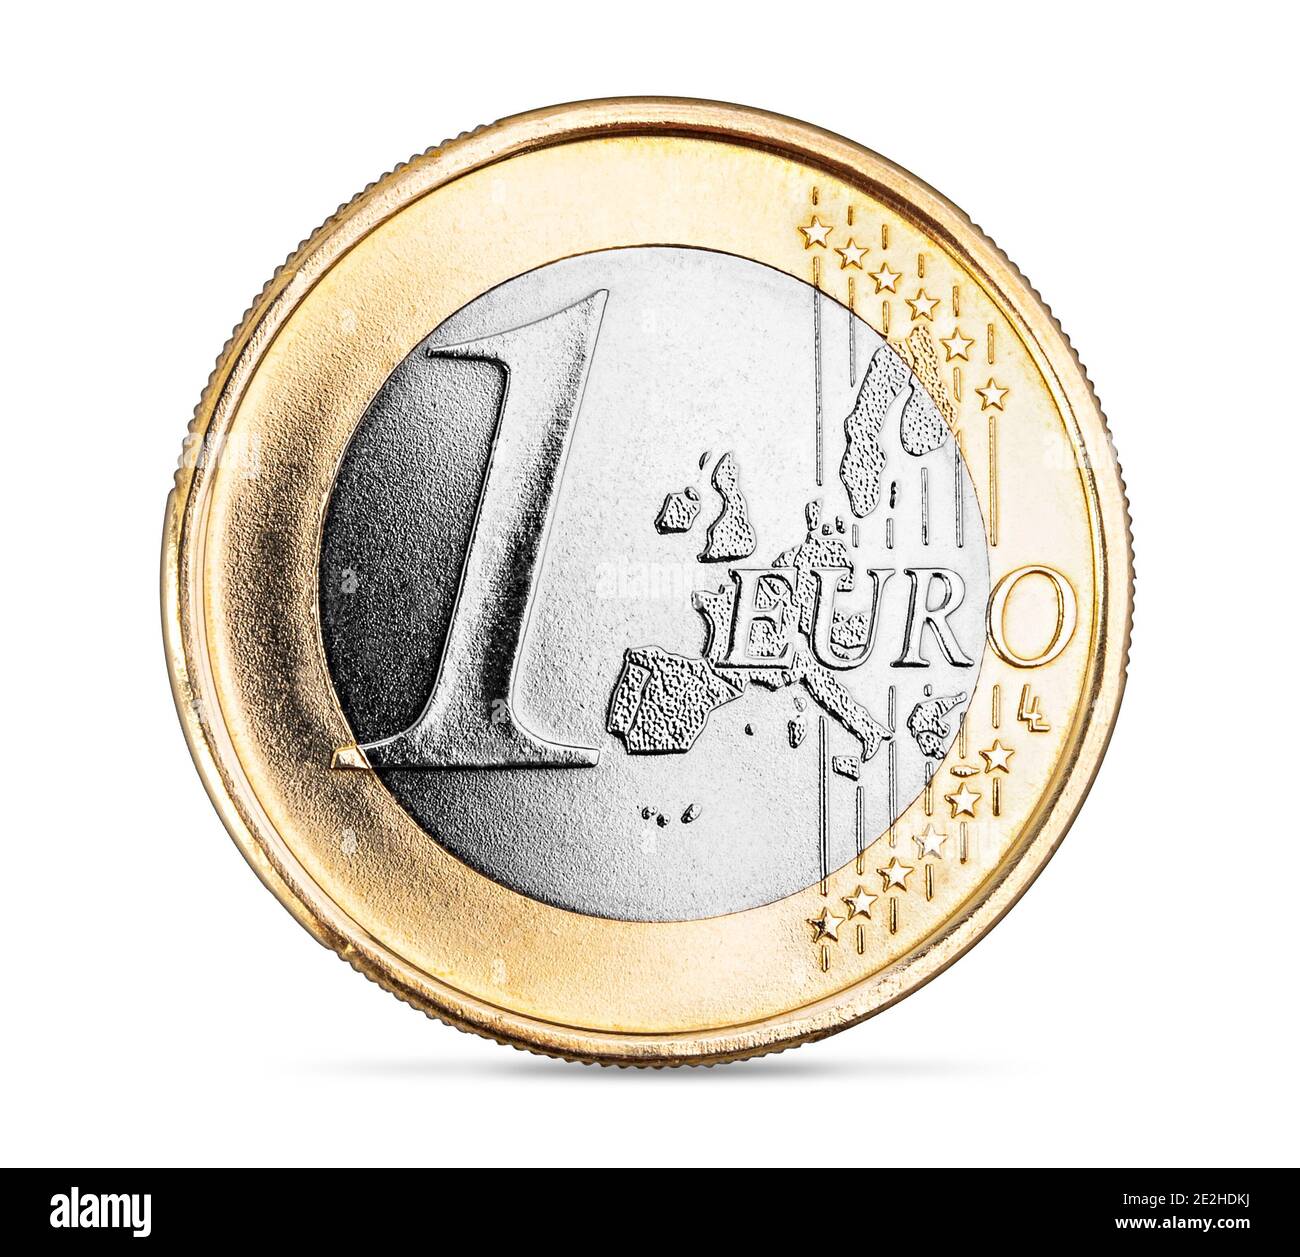 perfect new silver golden one euro coin from europe isolated on white background. european currency business financial concept Stock Photo